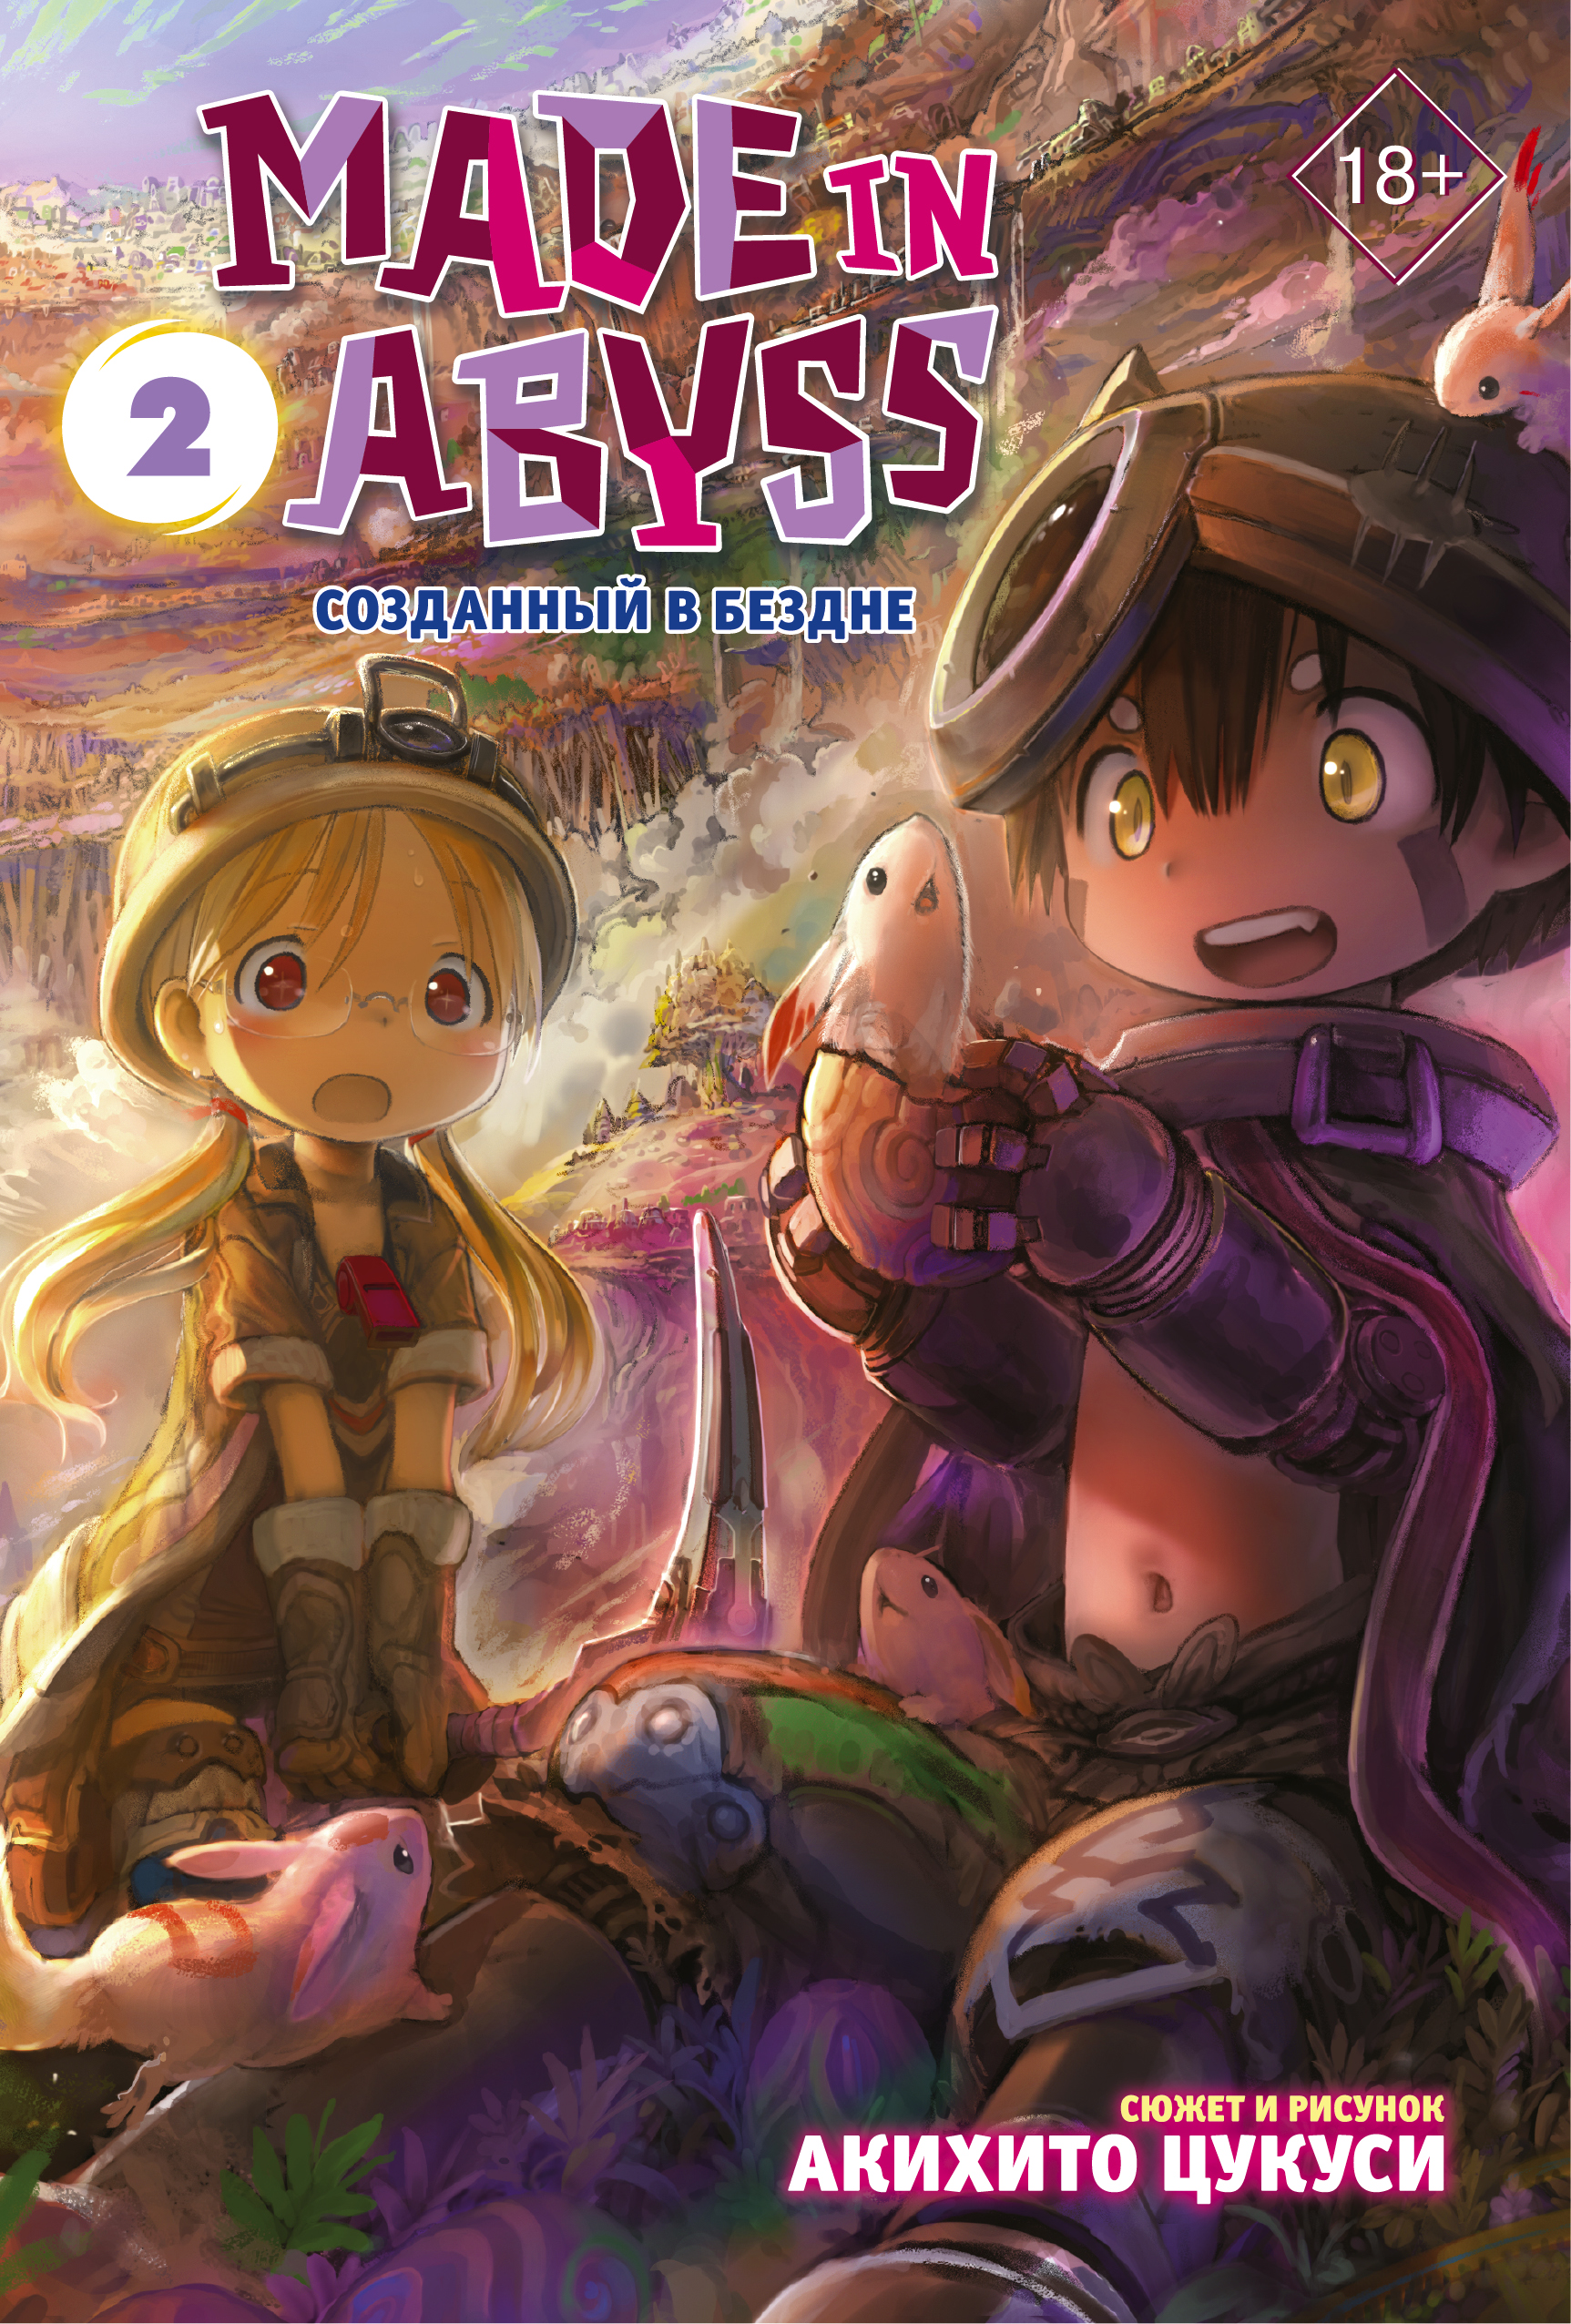 Made in Abyss. Созданный в Бездне. Том 2 набор манга made in abyss созданный в бездне том 4 закладка i m an anime person магнитная 6 pack